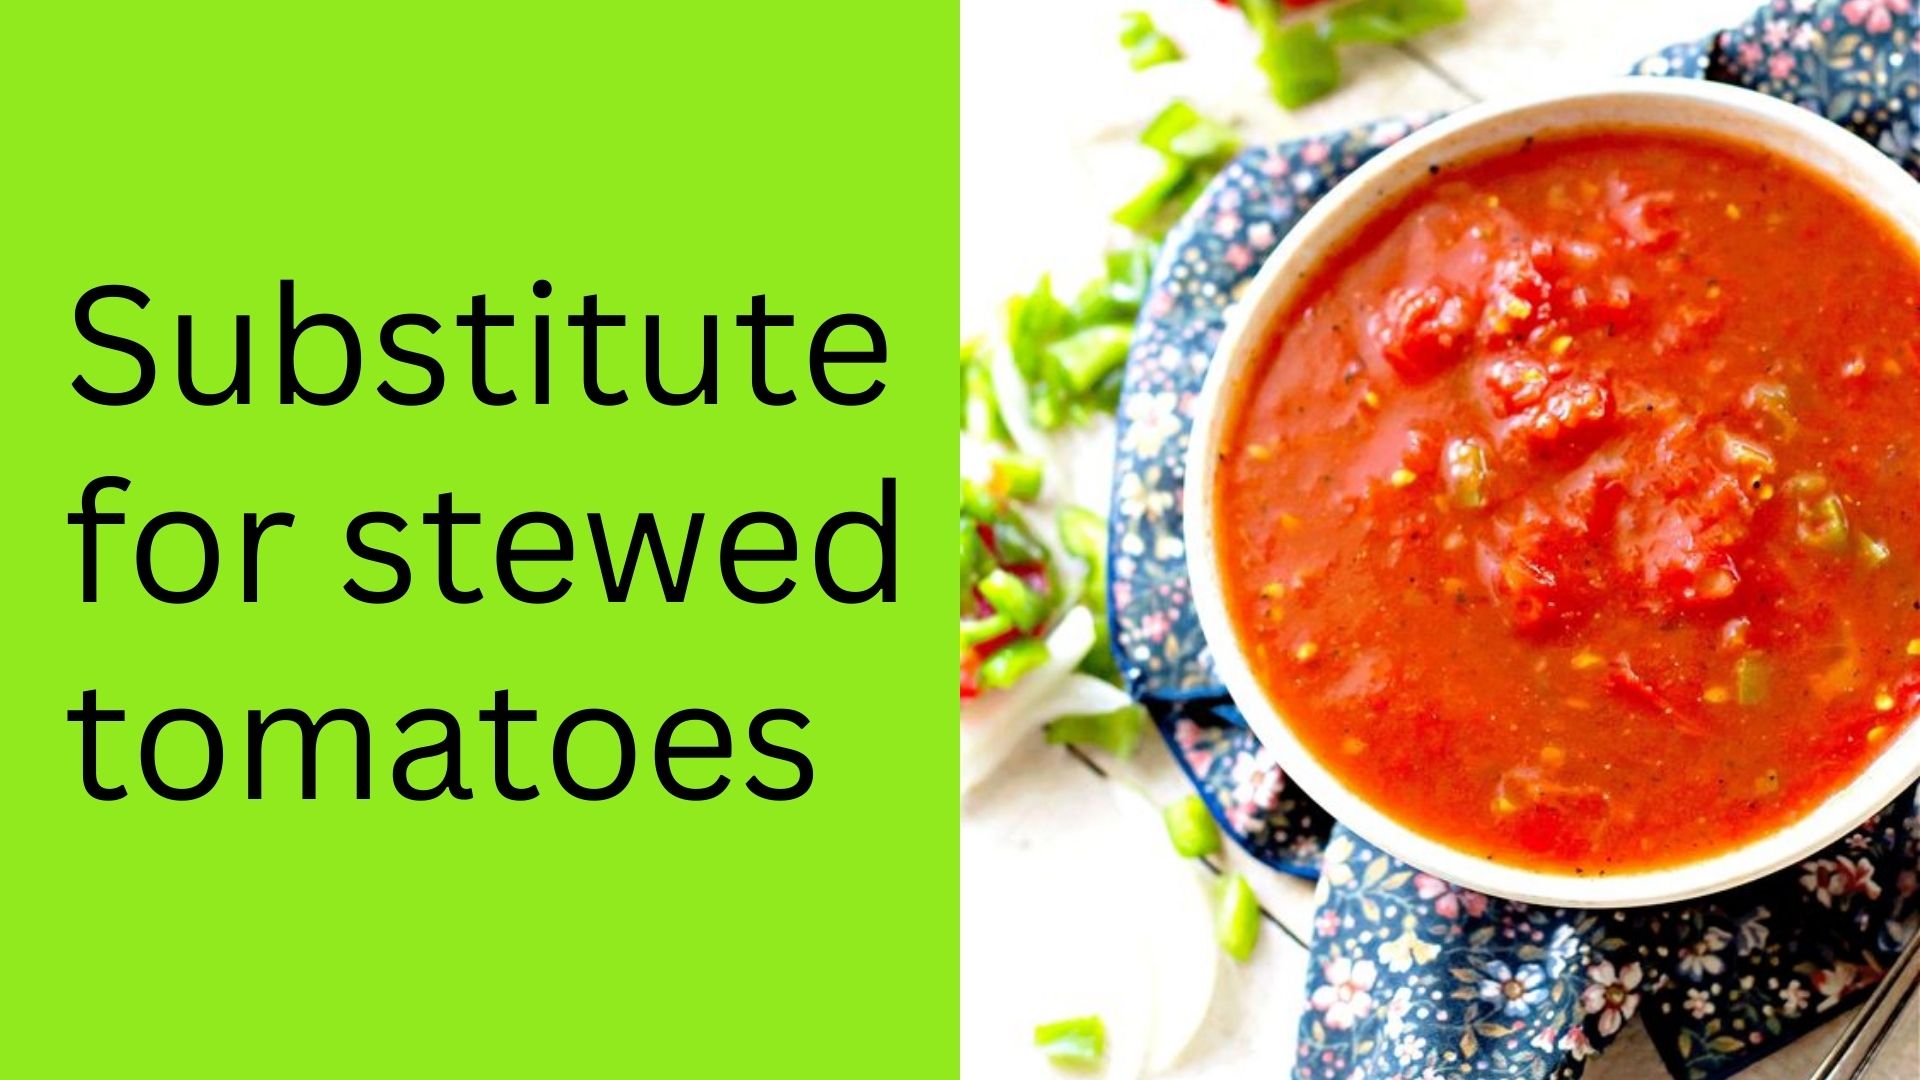 Substitute for stewed tomatoes